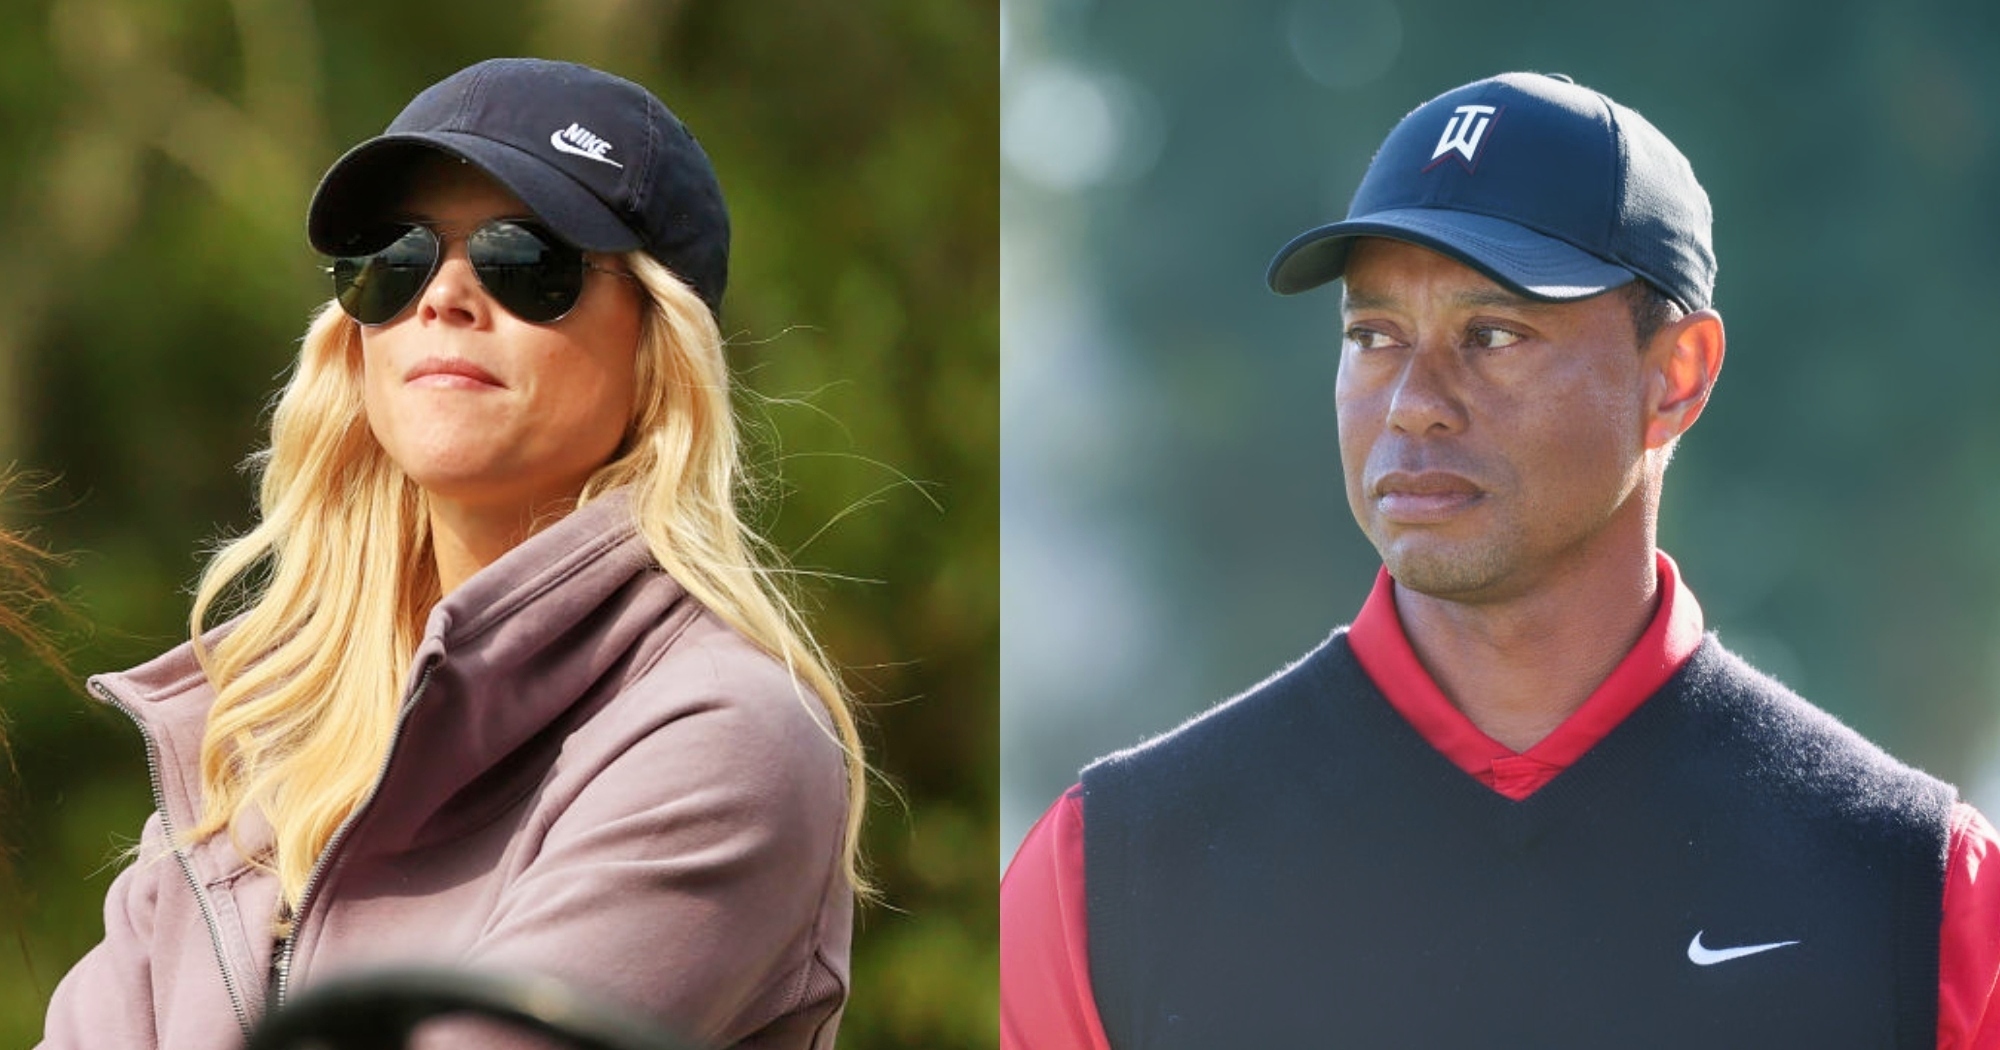 Tiger Woods Ex-Wife Gave Her Take On His Ex-GF Suing pic